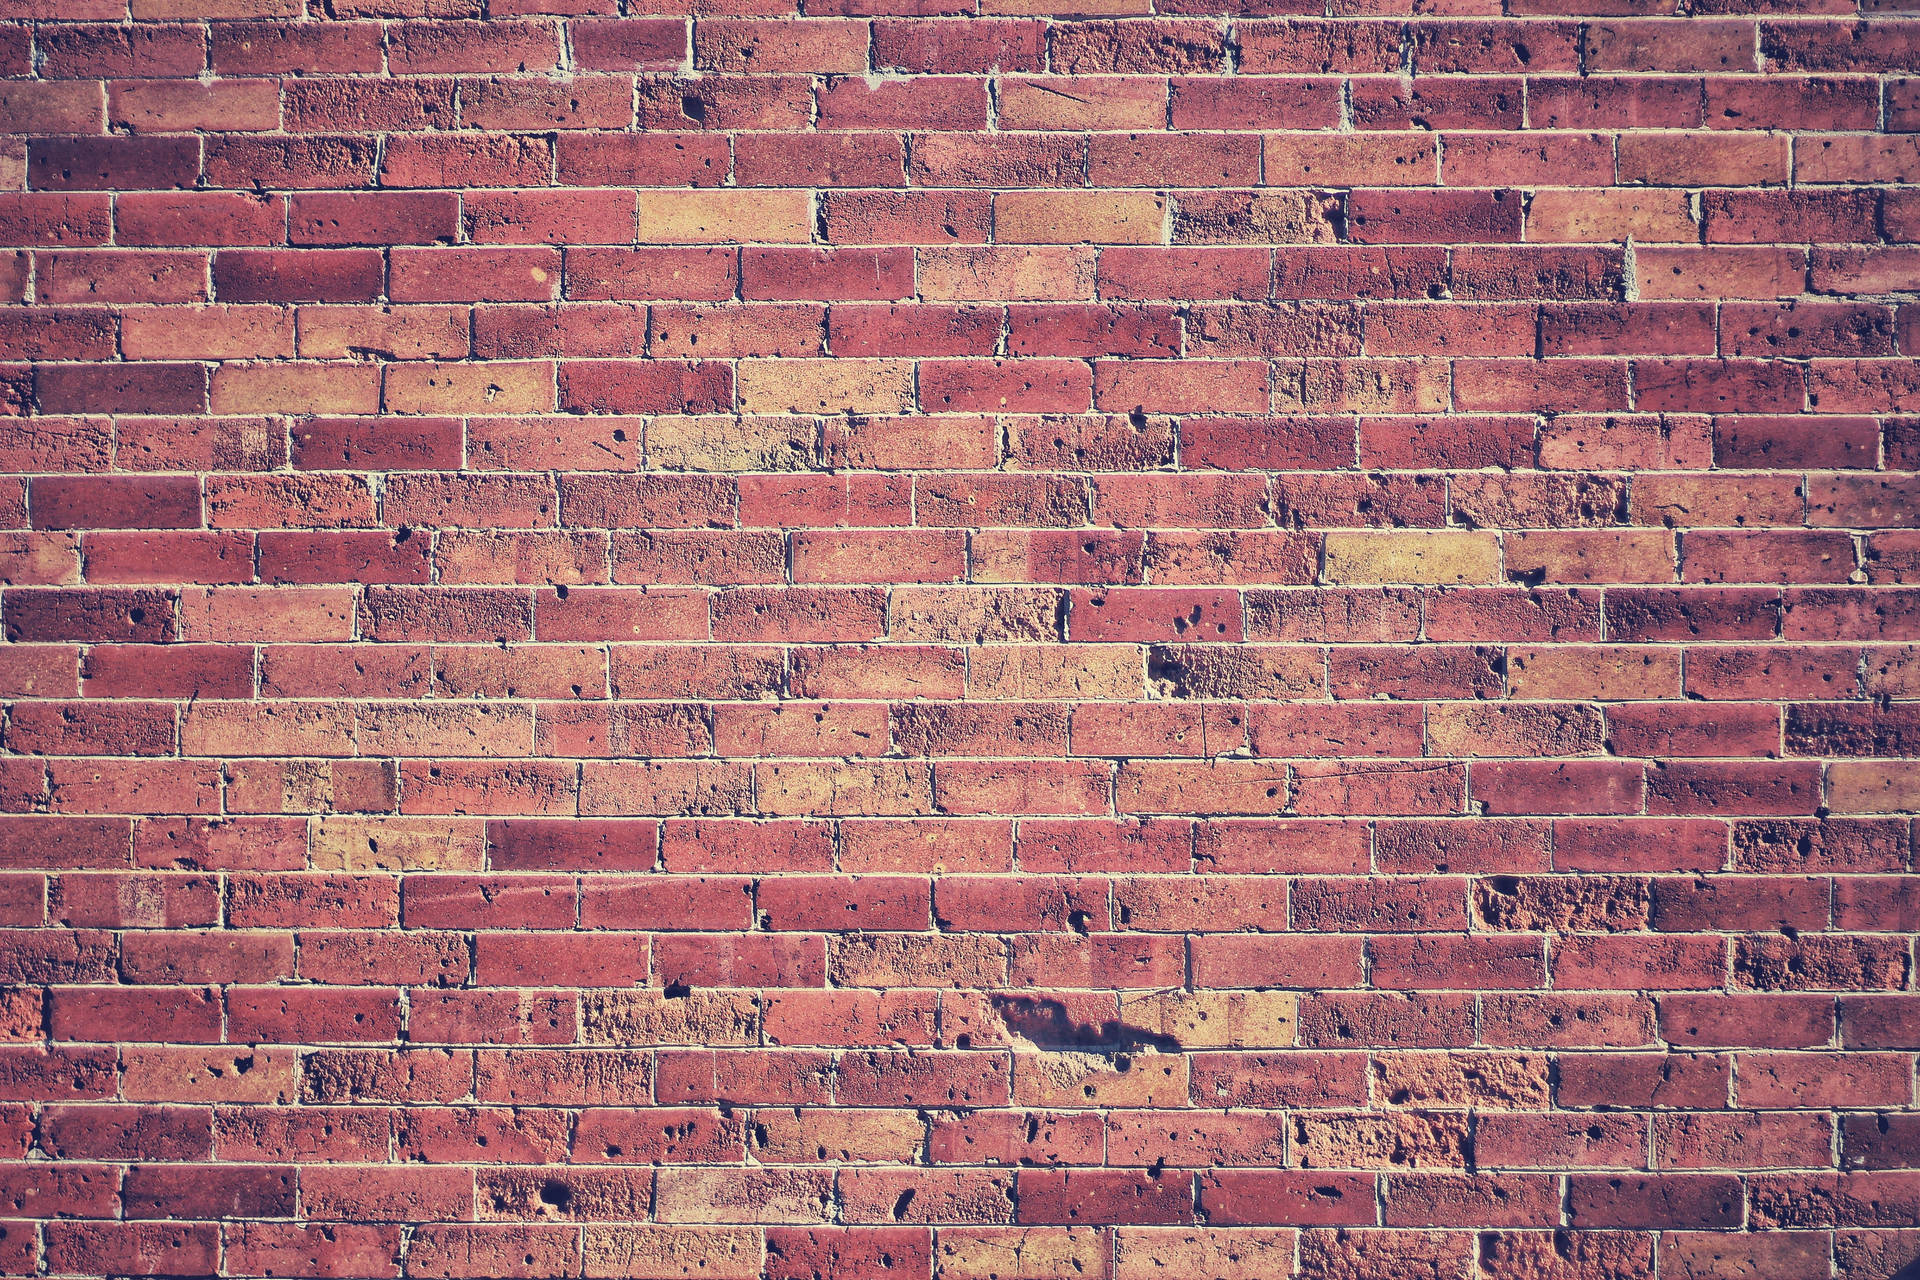 A close-up view of aged, stacked bricks. Wallpaper